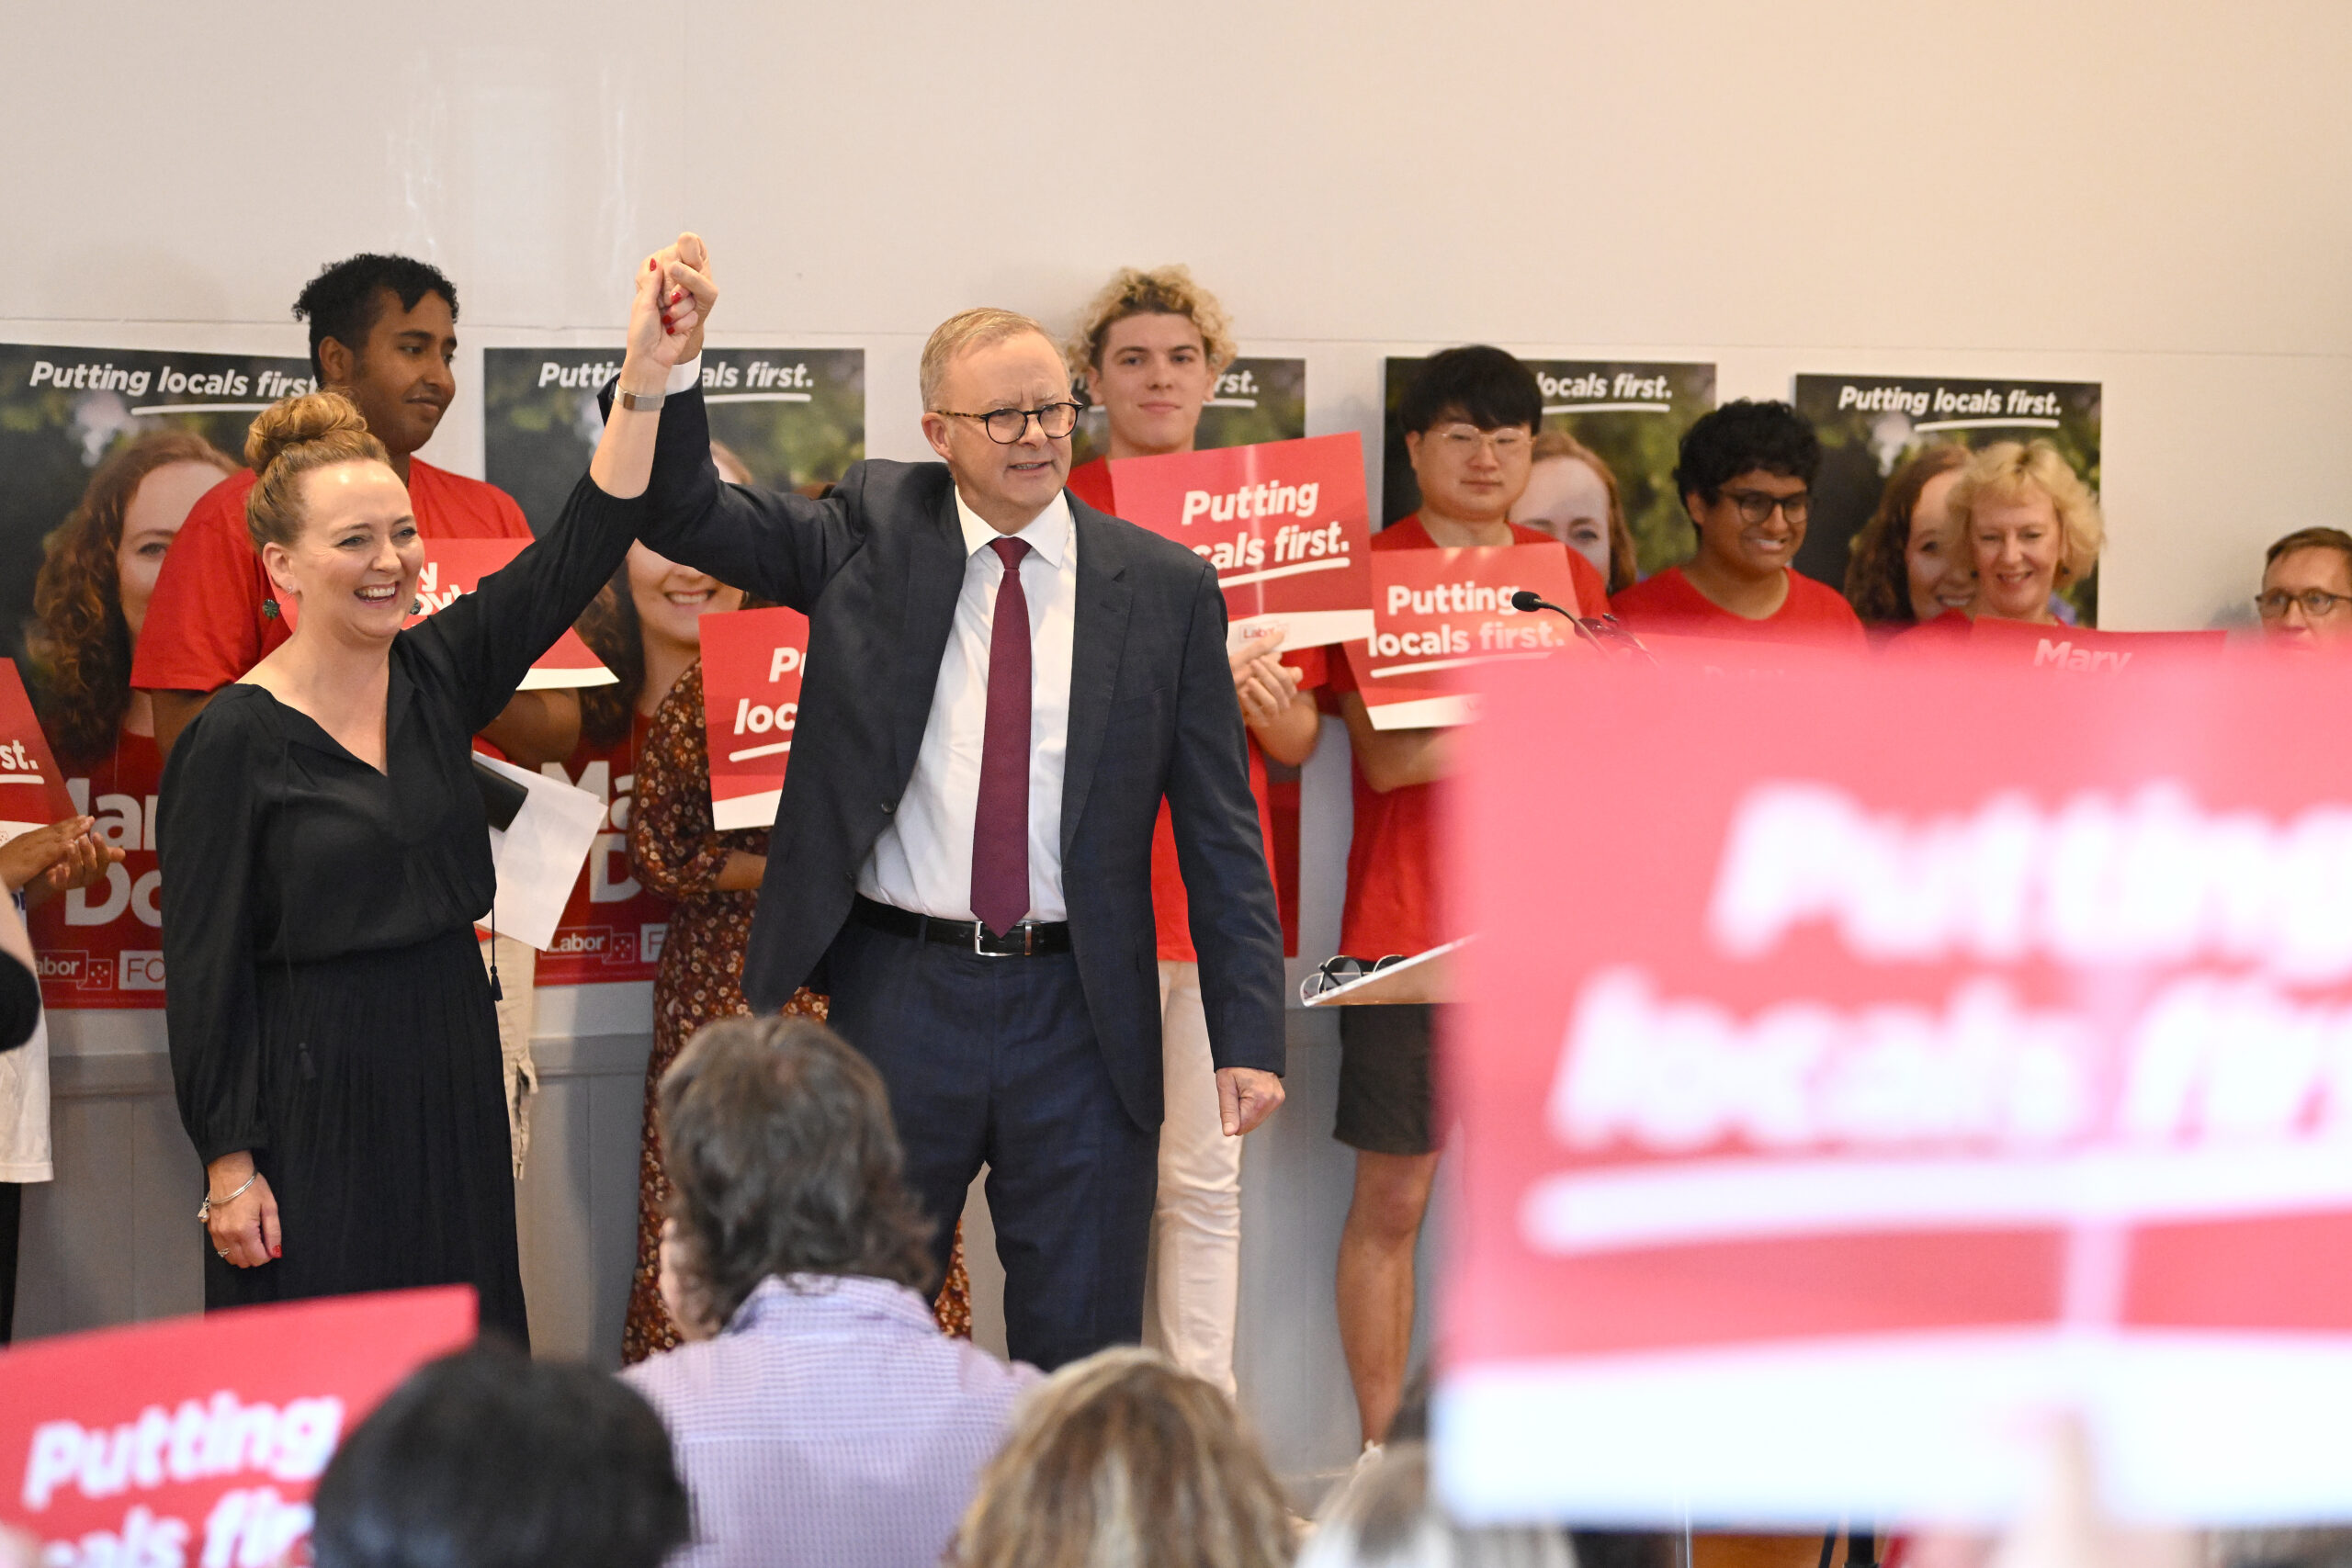 ANTHONY ALBANESE ASTON CAMPAIGN LAUNCH